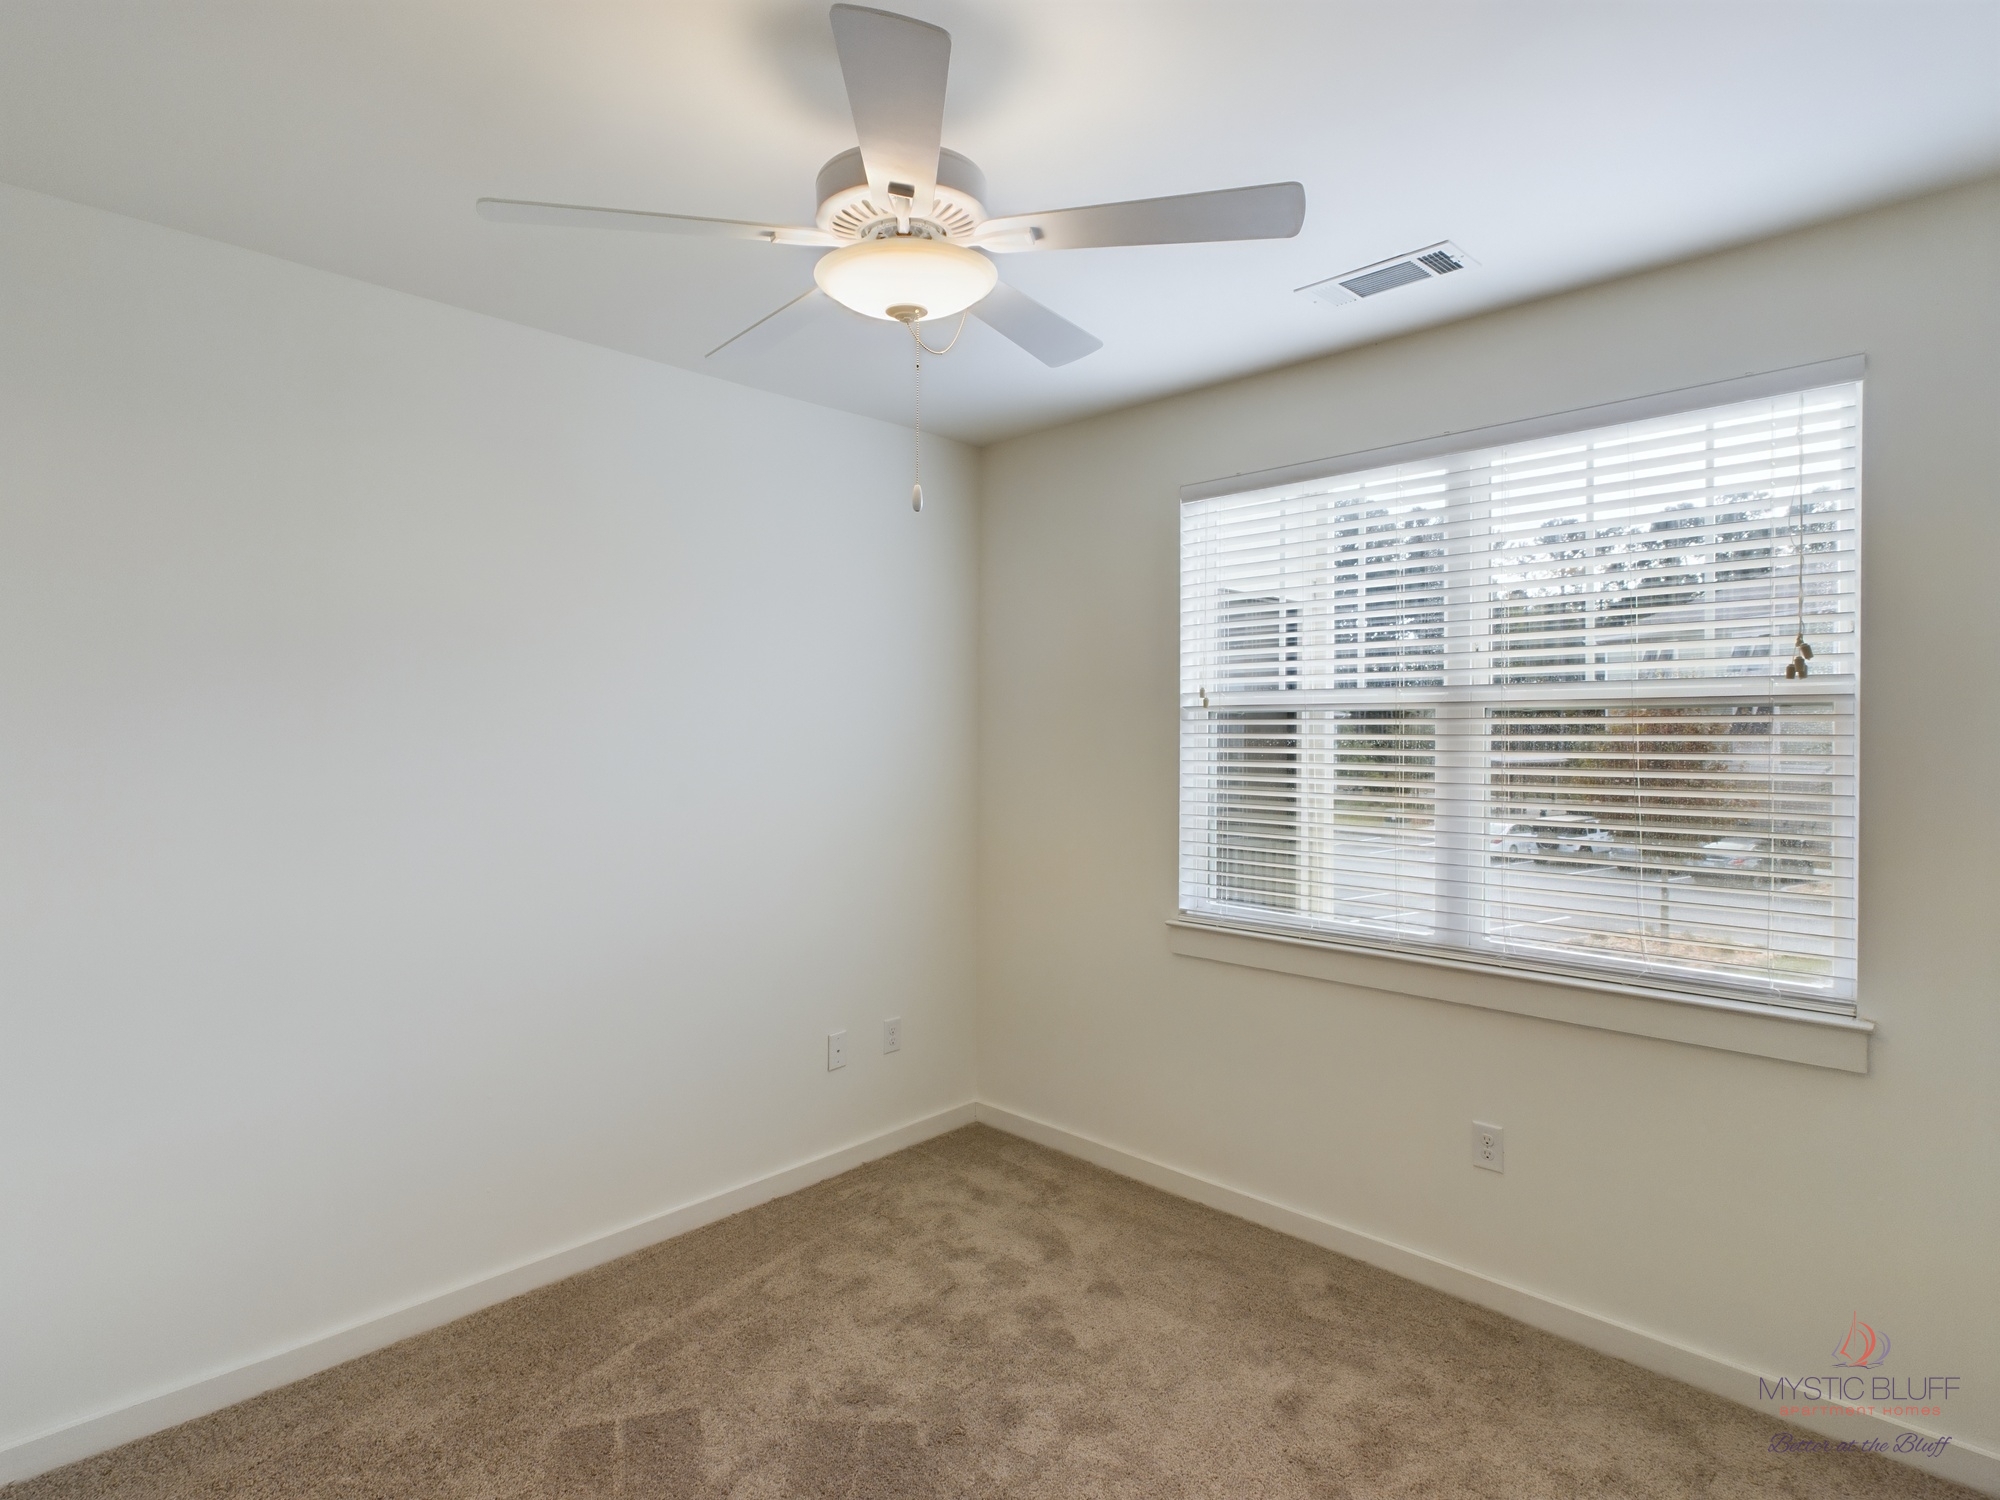 An empty apartment room with a ceiling fan and window.